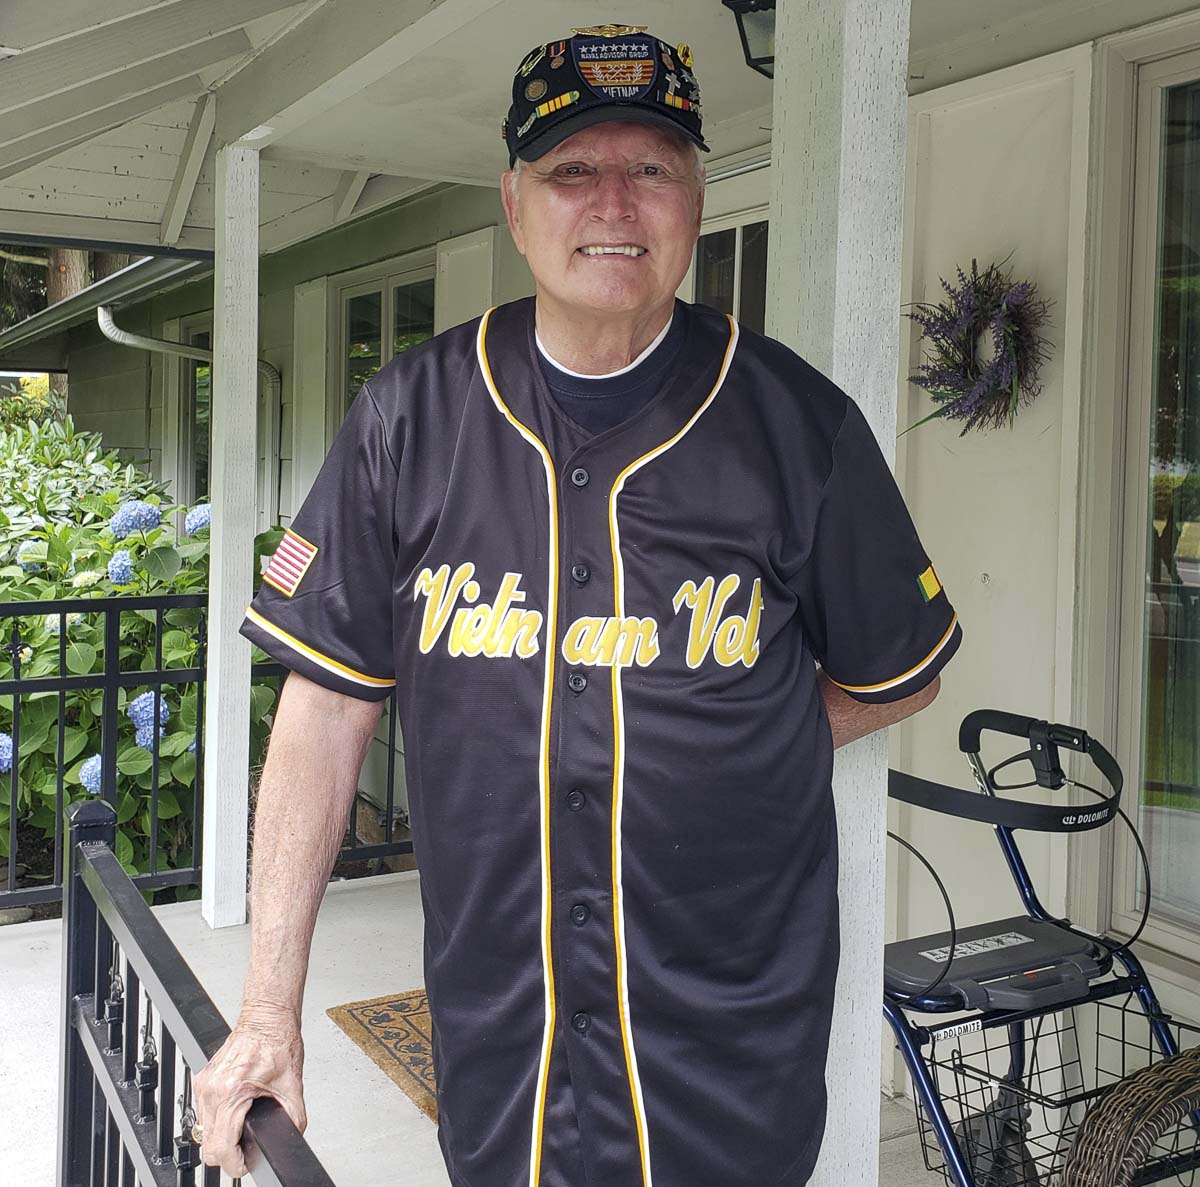 James Mead of Vancouver, who retired from the Navy in 1977, is the chaplain to several veterans organizations. He will be one of five honored at Heroes Night on Saturday at the east Vancouver Costco. Photo by Paul Valencia